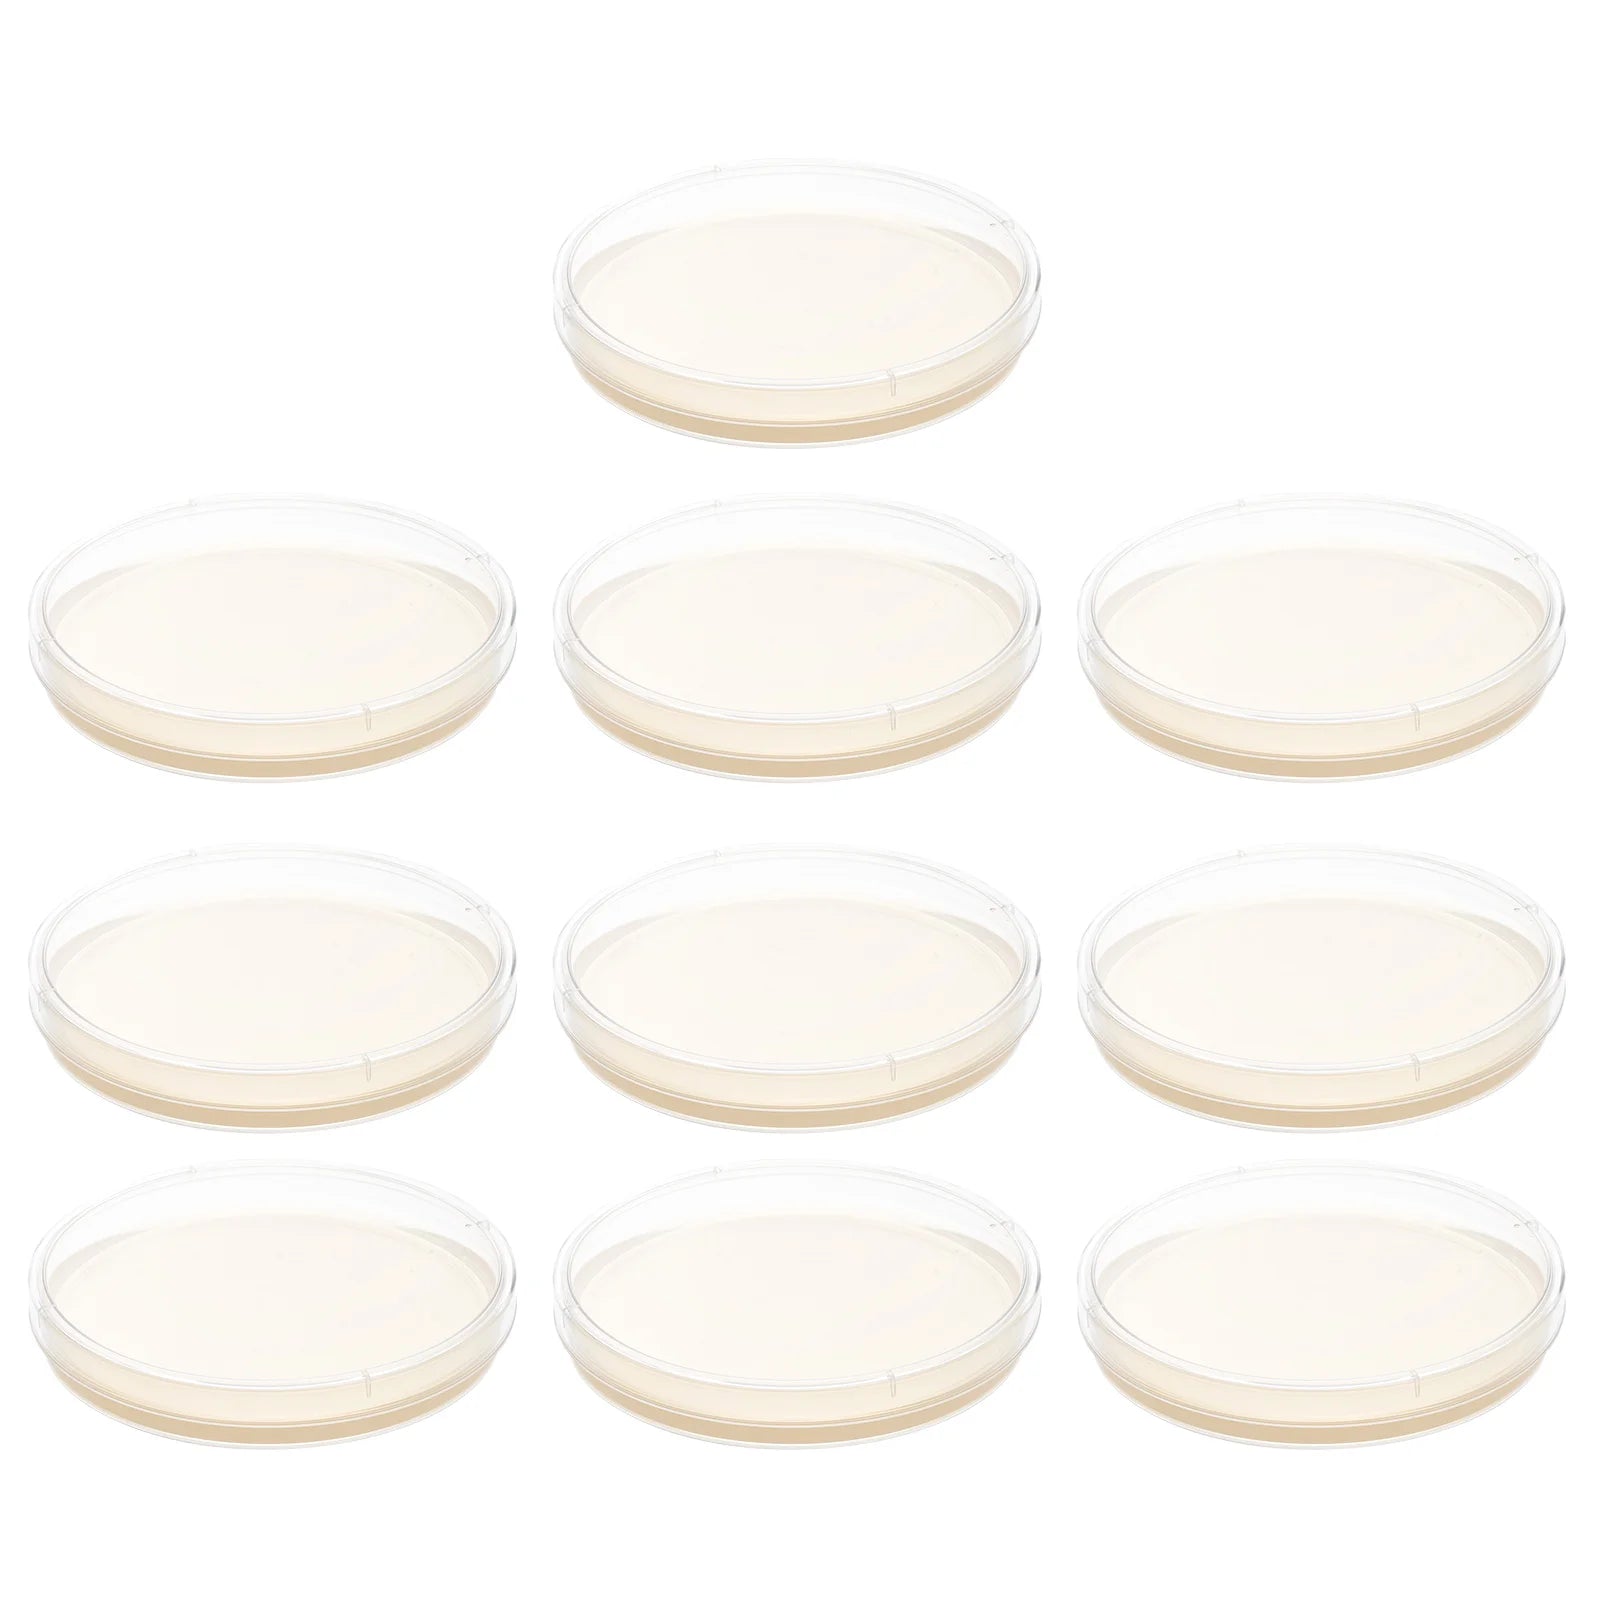 10 Pcs Top Nutrient Nutrient Tryptic Soy Agar Plate Child Kids Mushroom Cultivation Nutrient Tryptic Soy Agar Plates Poured - Lab supply international 